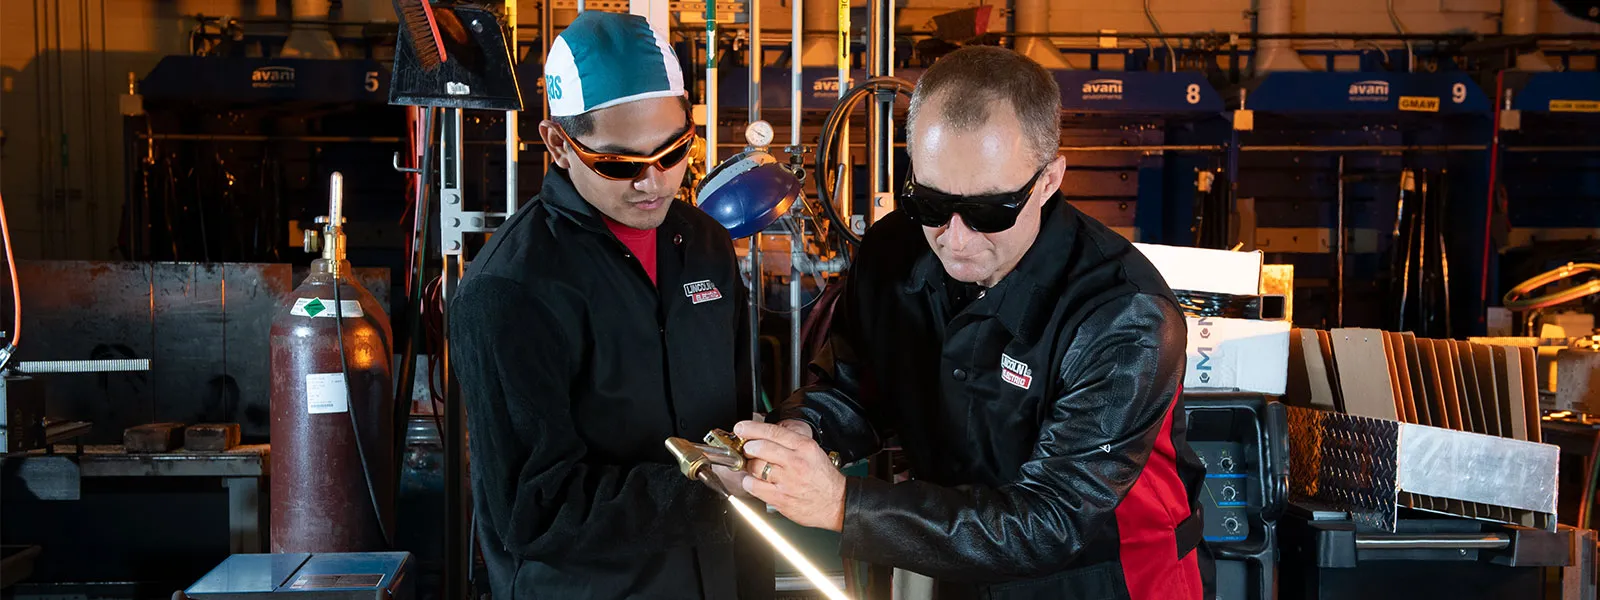 Instructor works with a student bringing real-world welding experience in the on-campus lab.